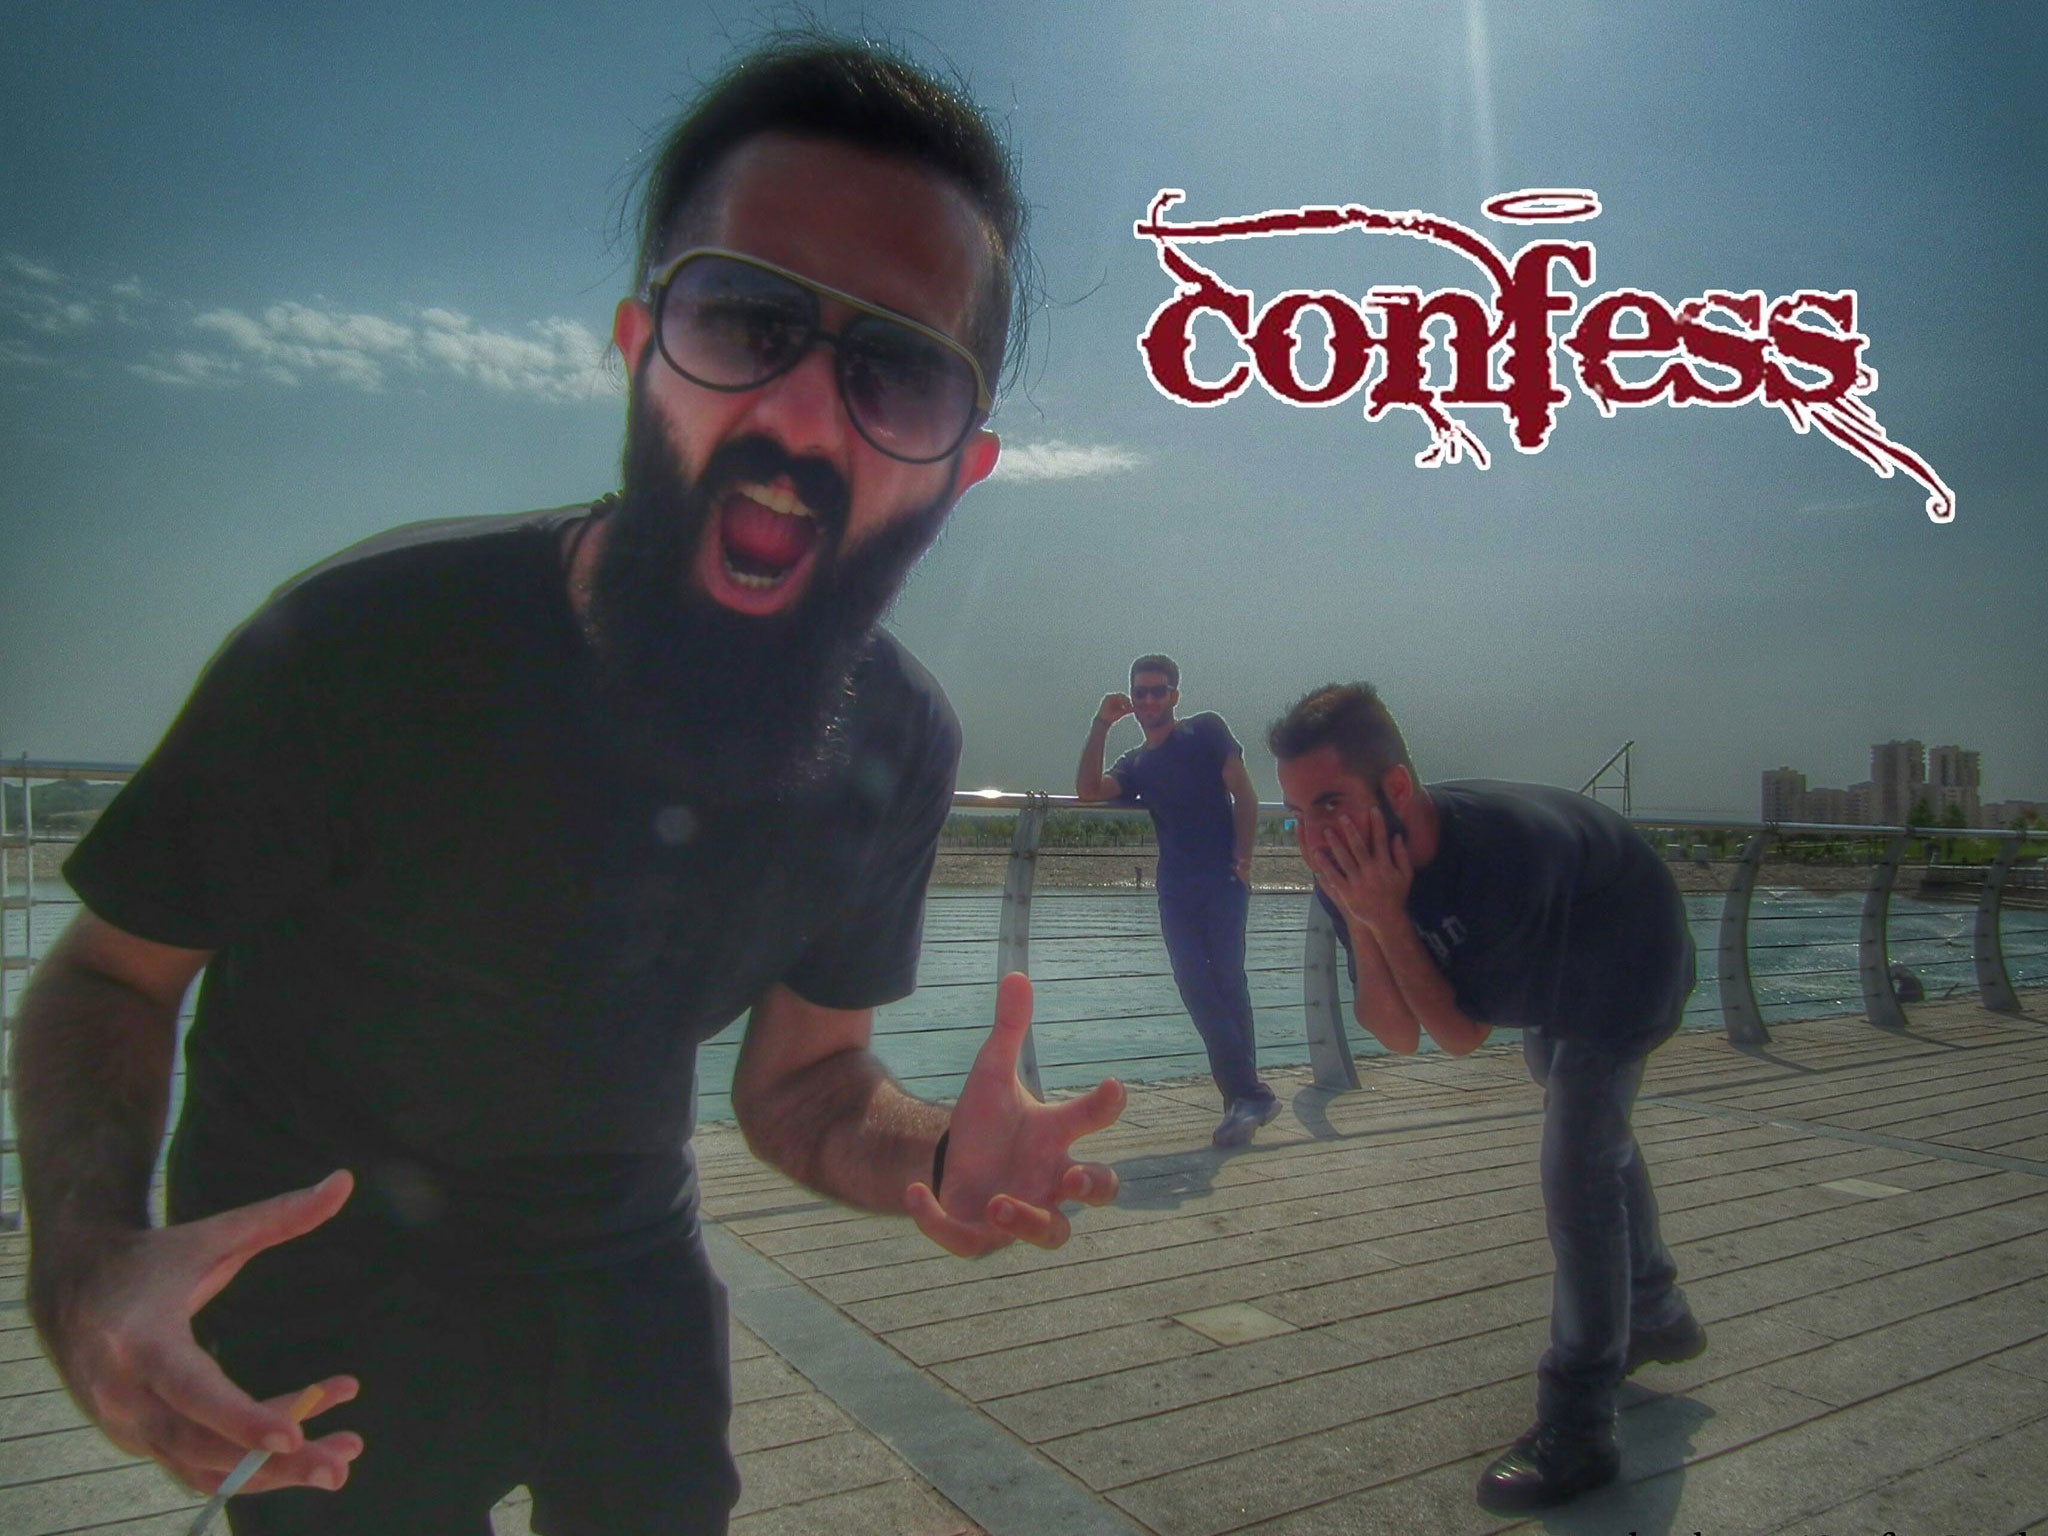 Iranian metal band Confess have reportedly been jailed on blasphemy charges